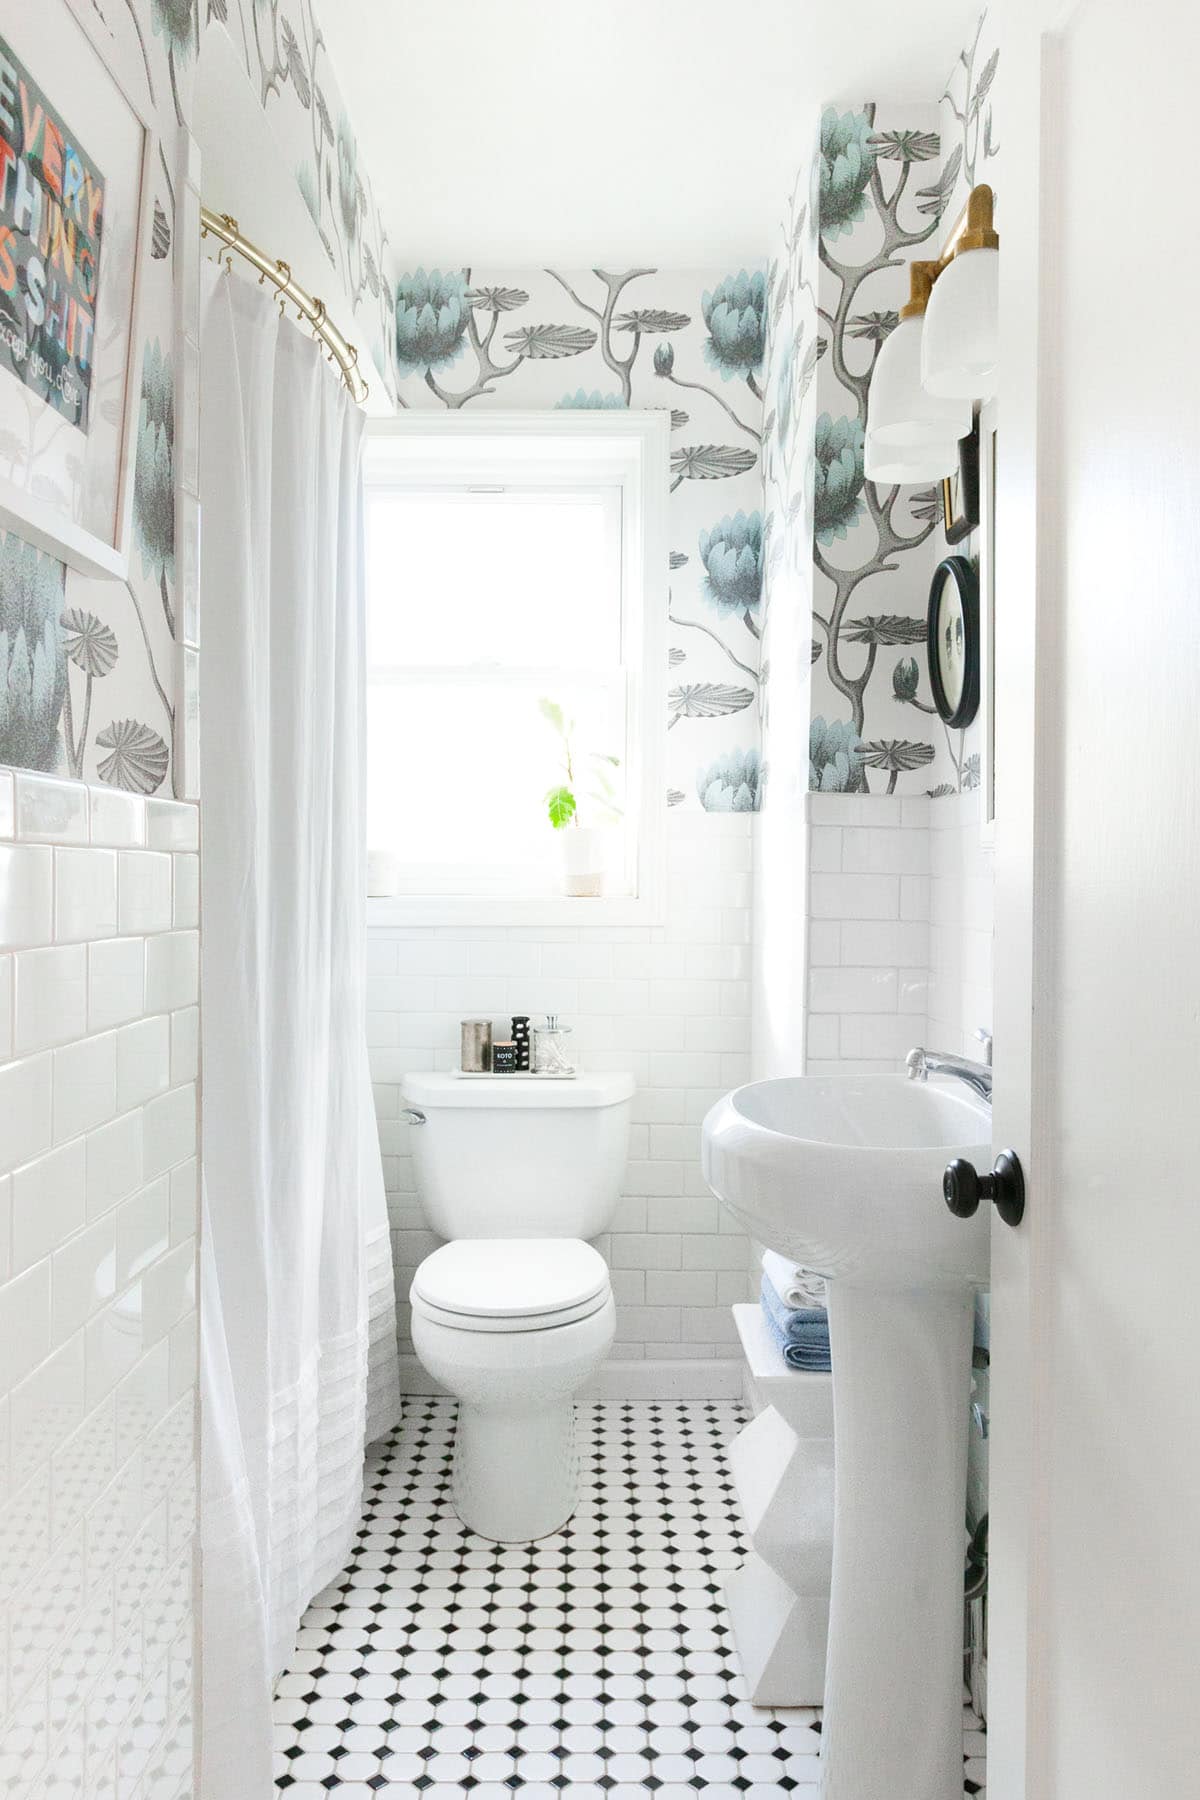 bold wallpaper and small updates make a big impact in this mini bathroom makeover | details on coco kelley